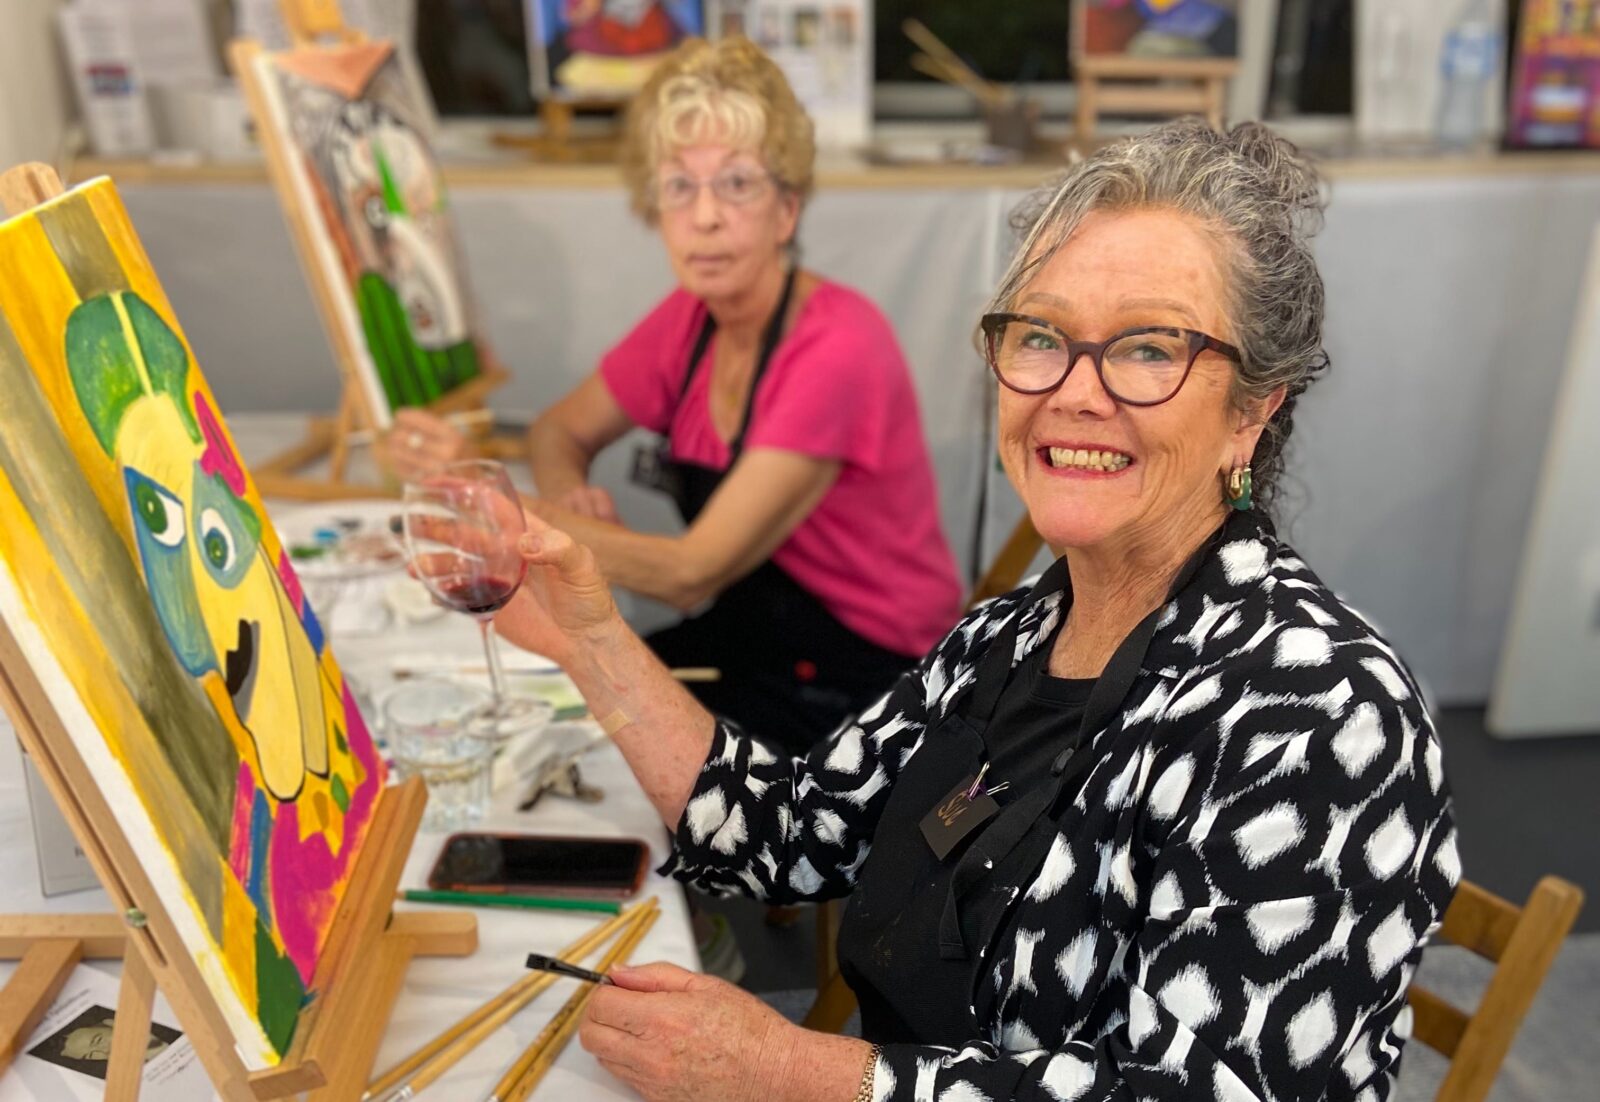 Painting Workshop Participant with Corinne Loxton, Blue Mountains artist